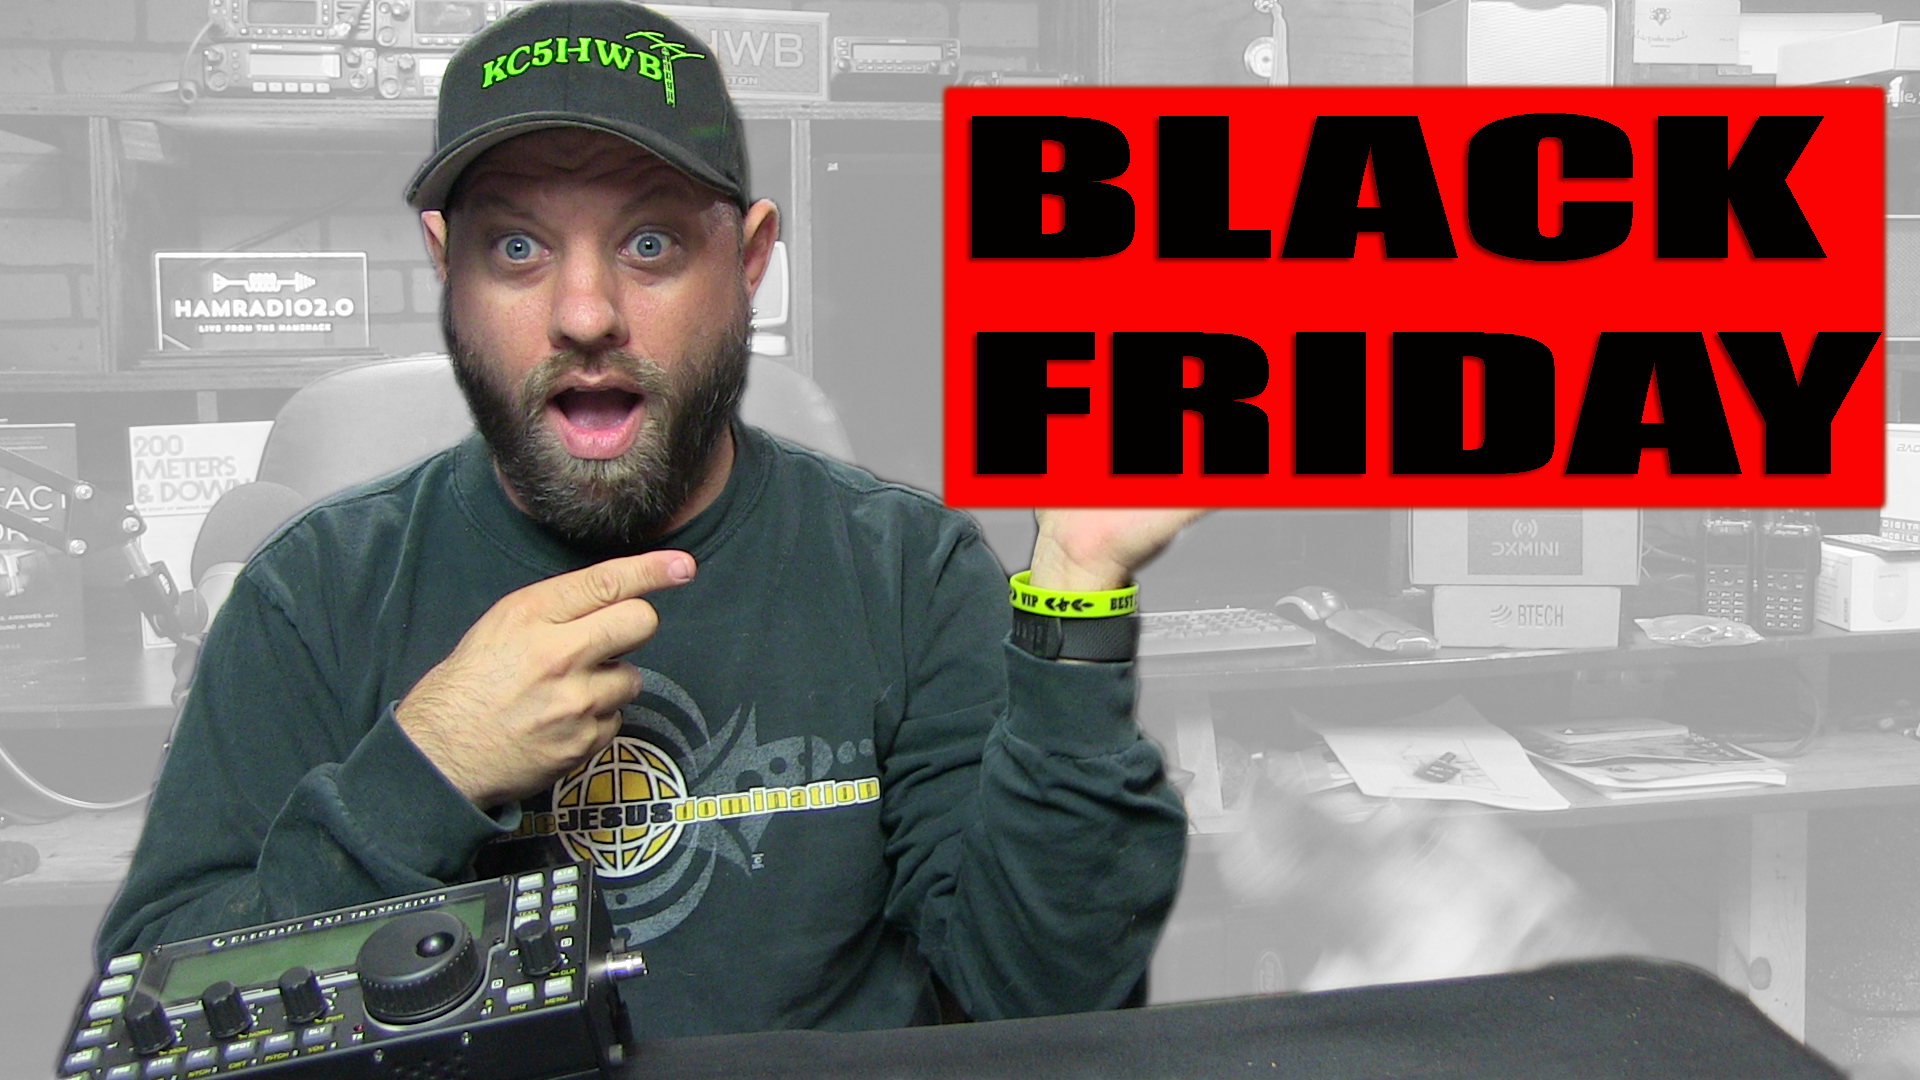 Episode 167: BLACK FRIDAY is HERE!